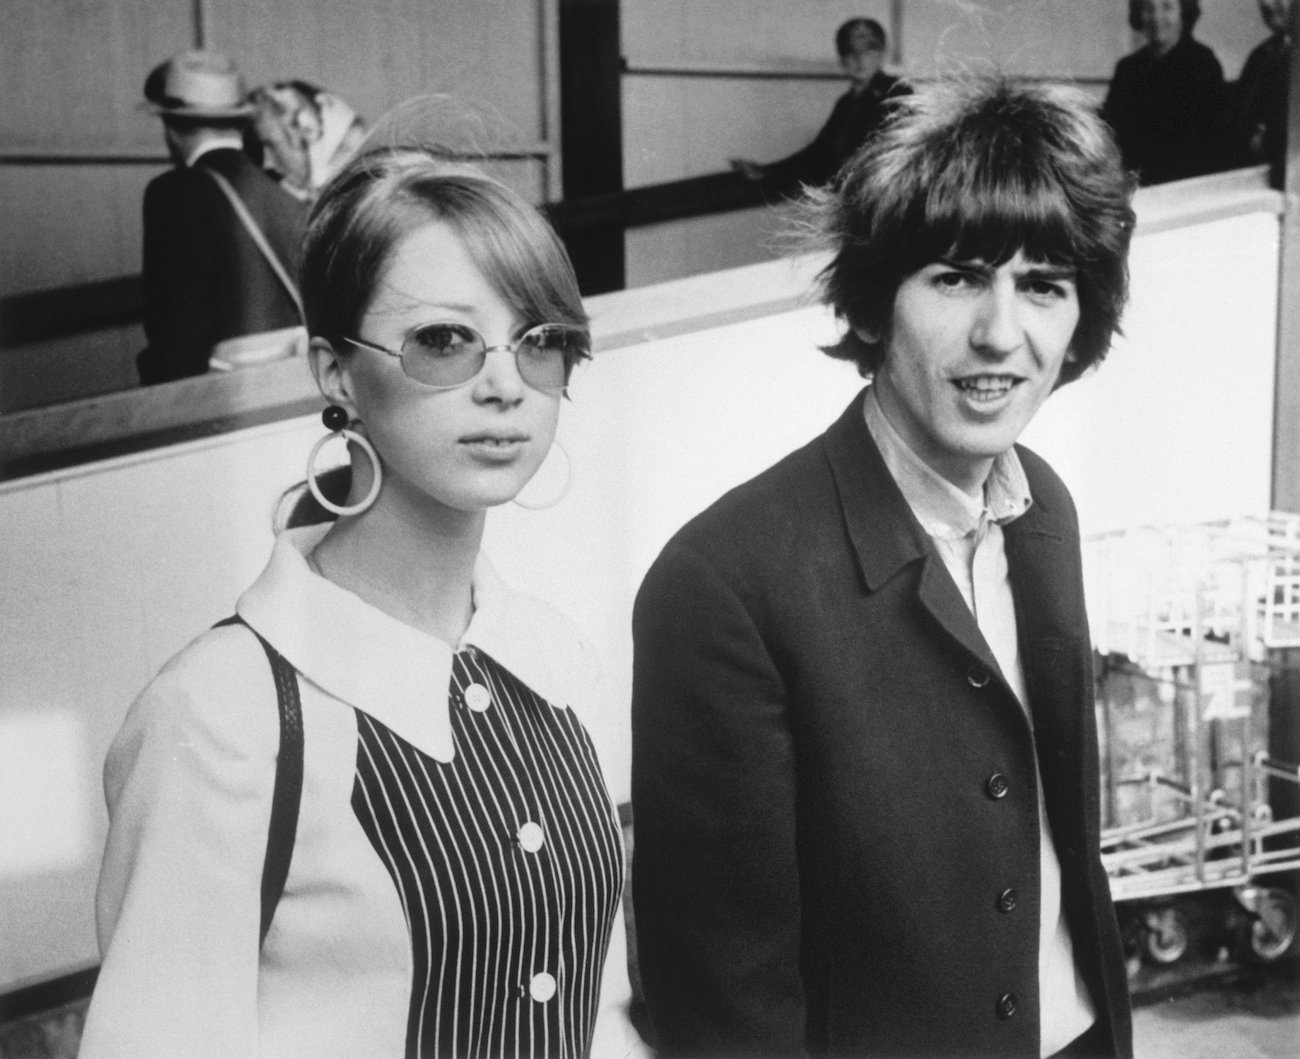 George Harrison and his wife Pattie Boyd in 1966.